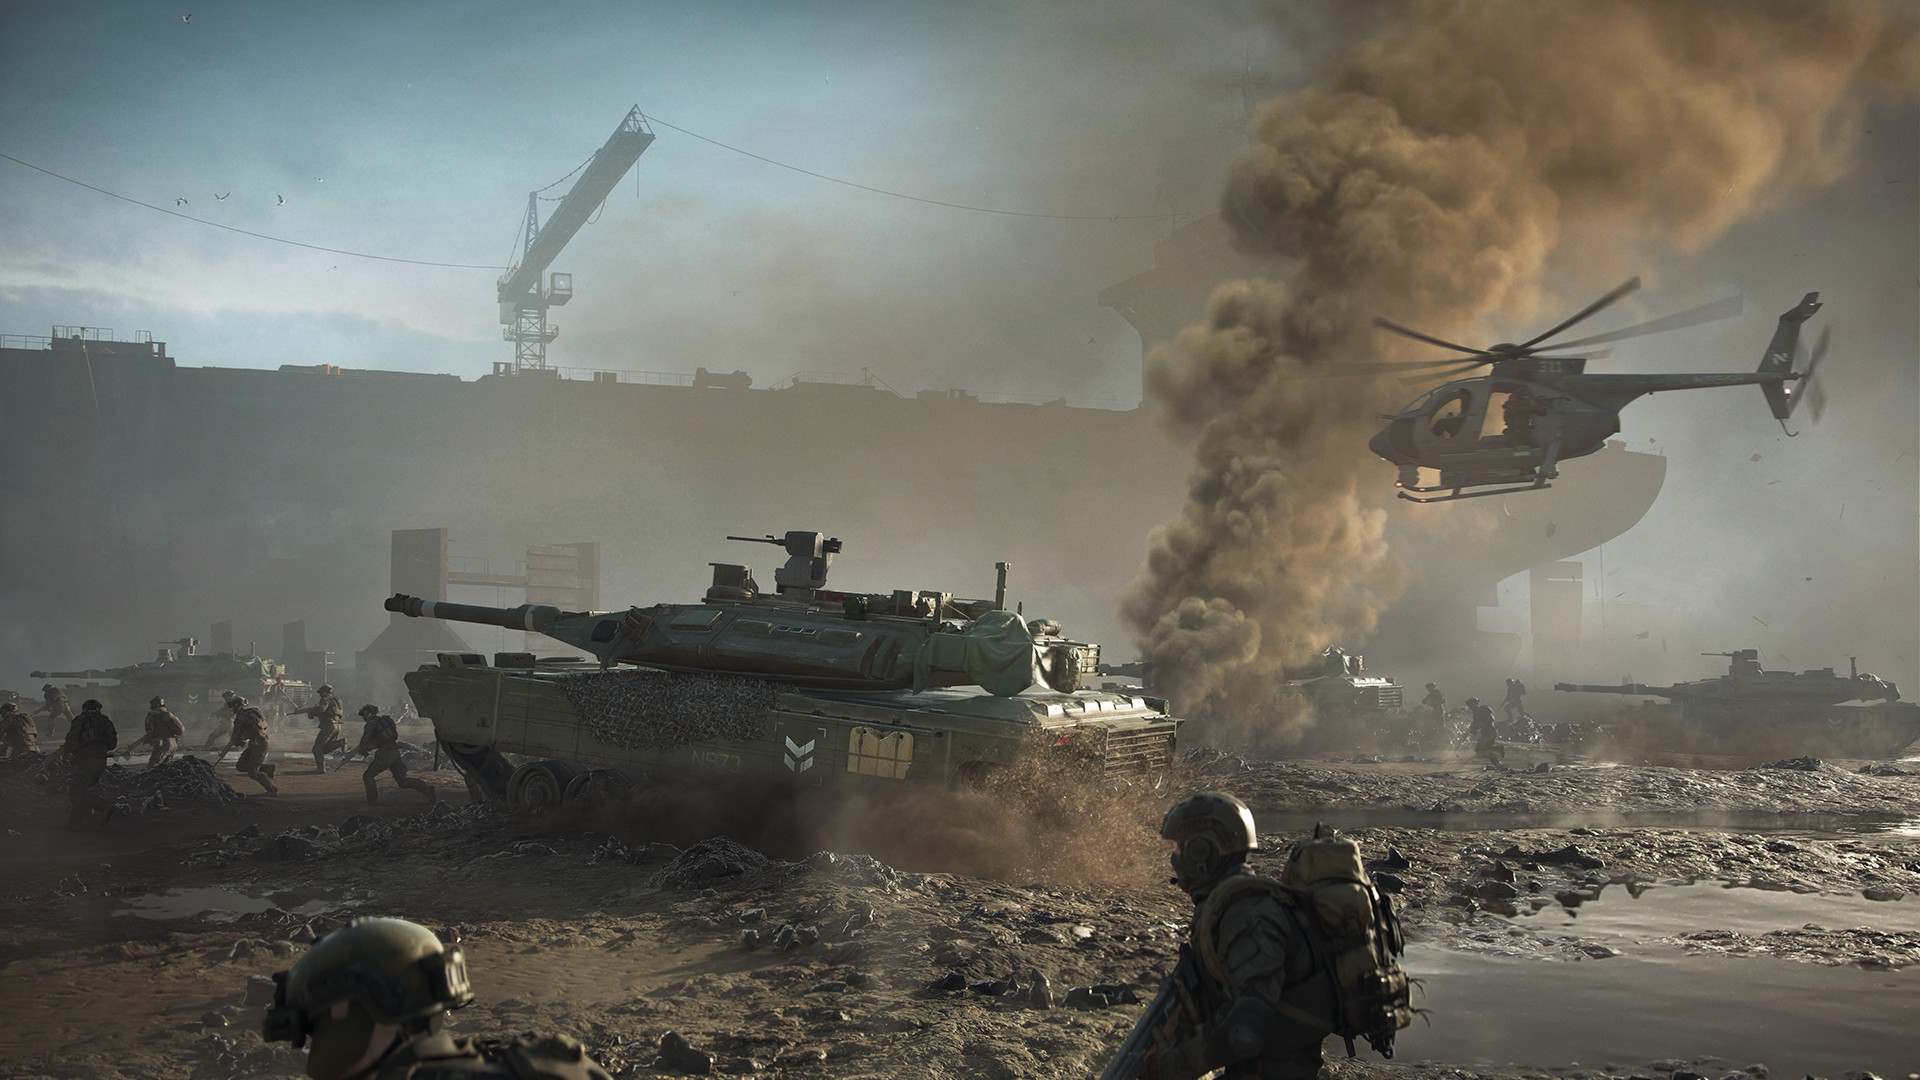 Battlefield 2042 release date: Soldiers, a tank, and a helicopter all moving towards the left through a battleground.